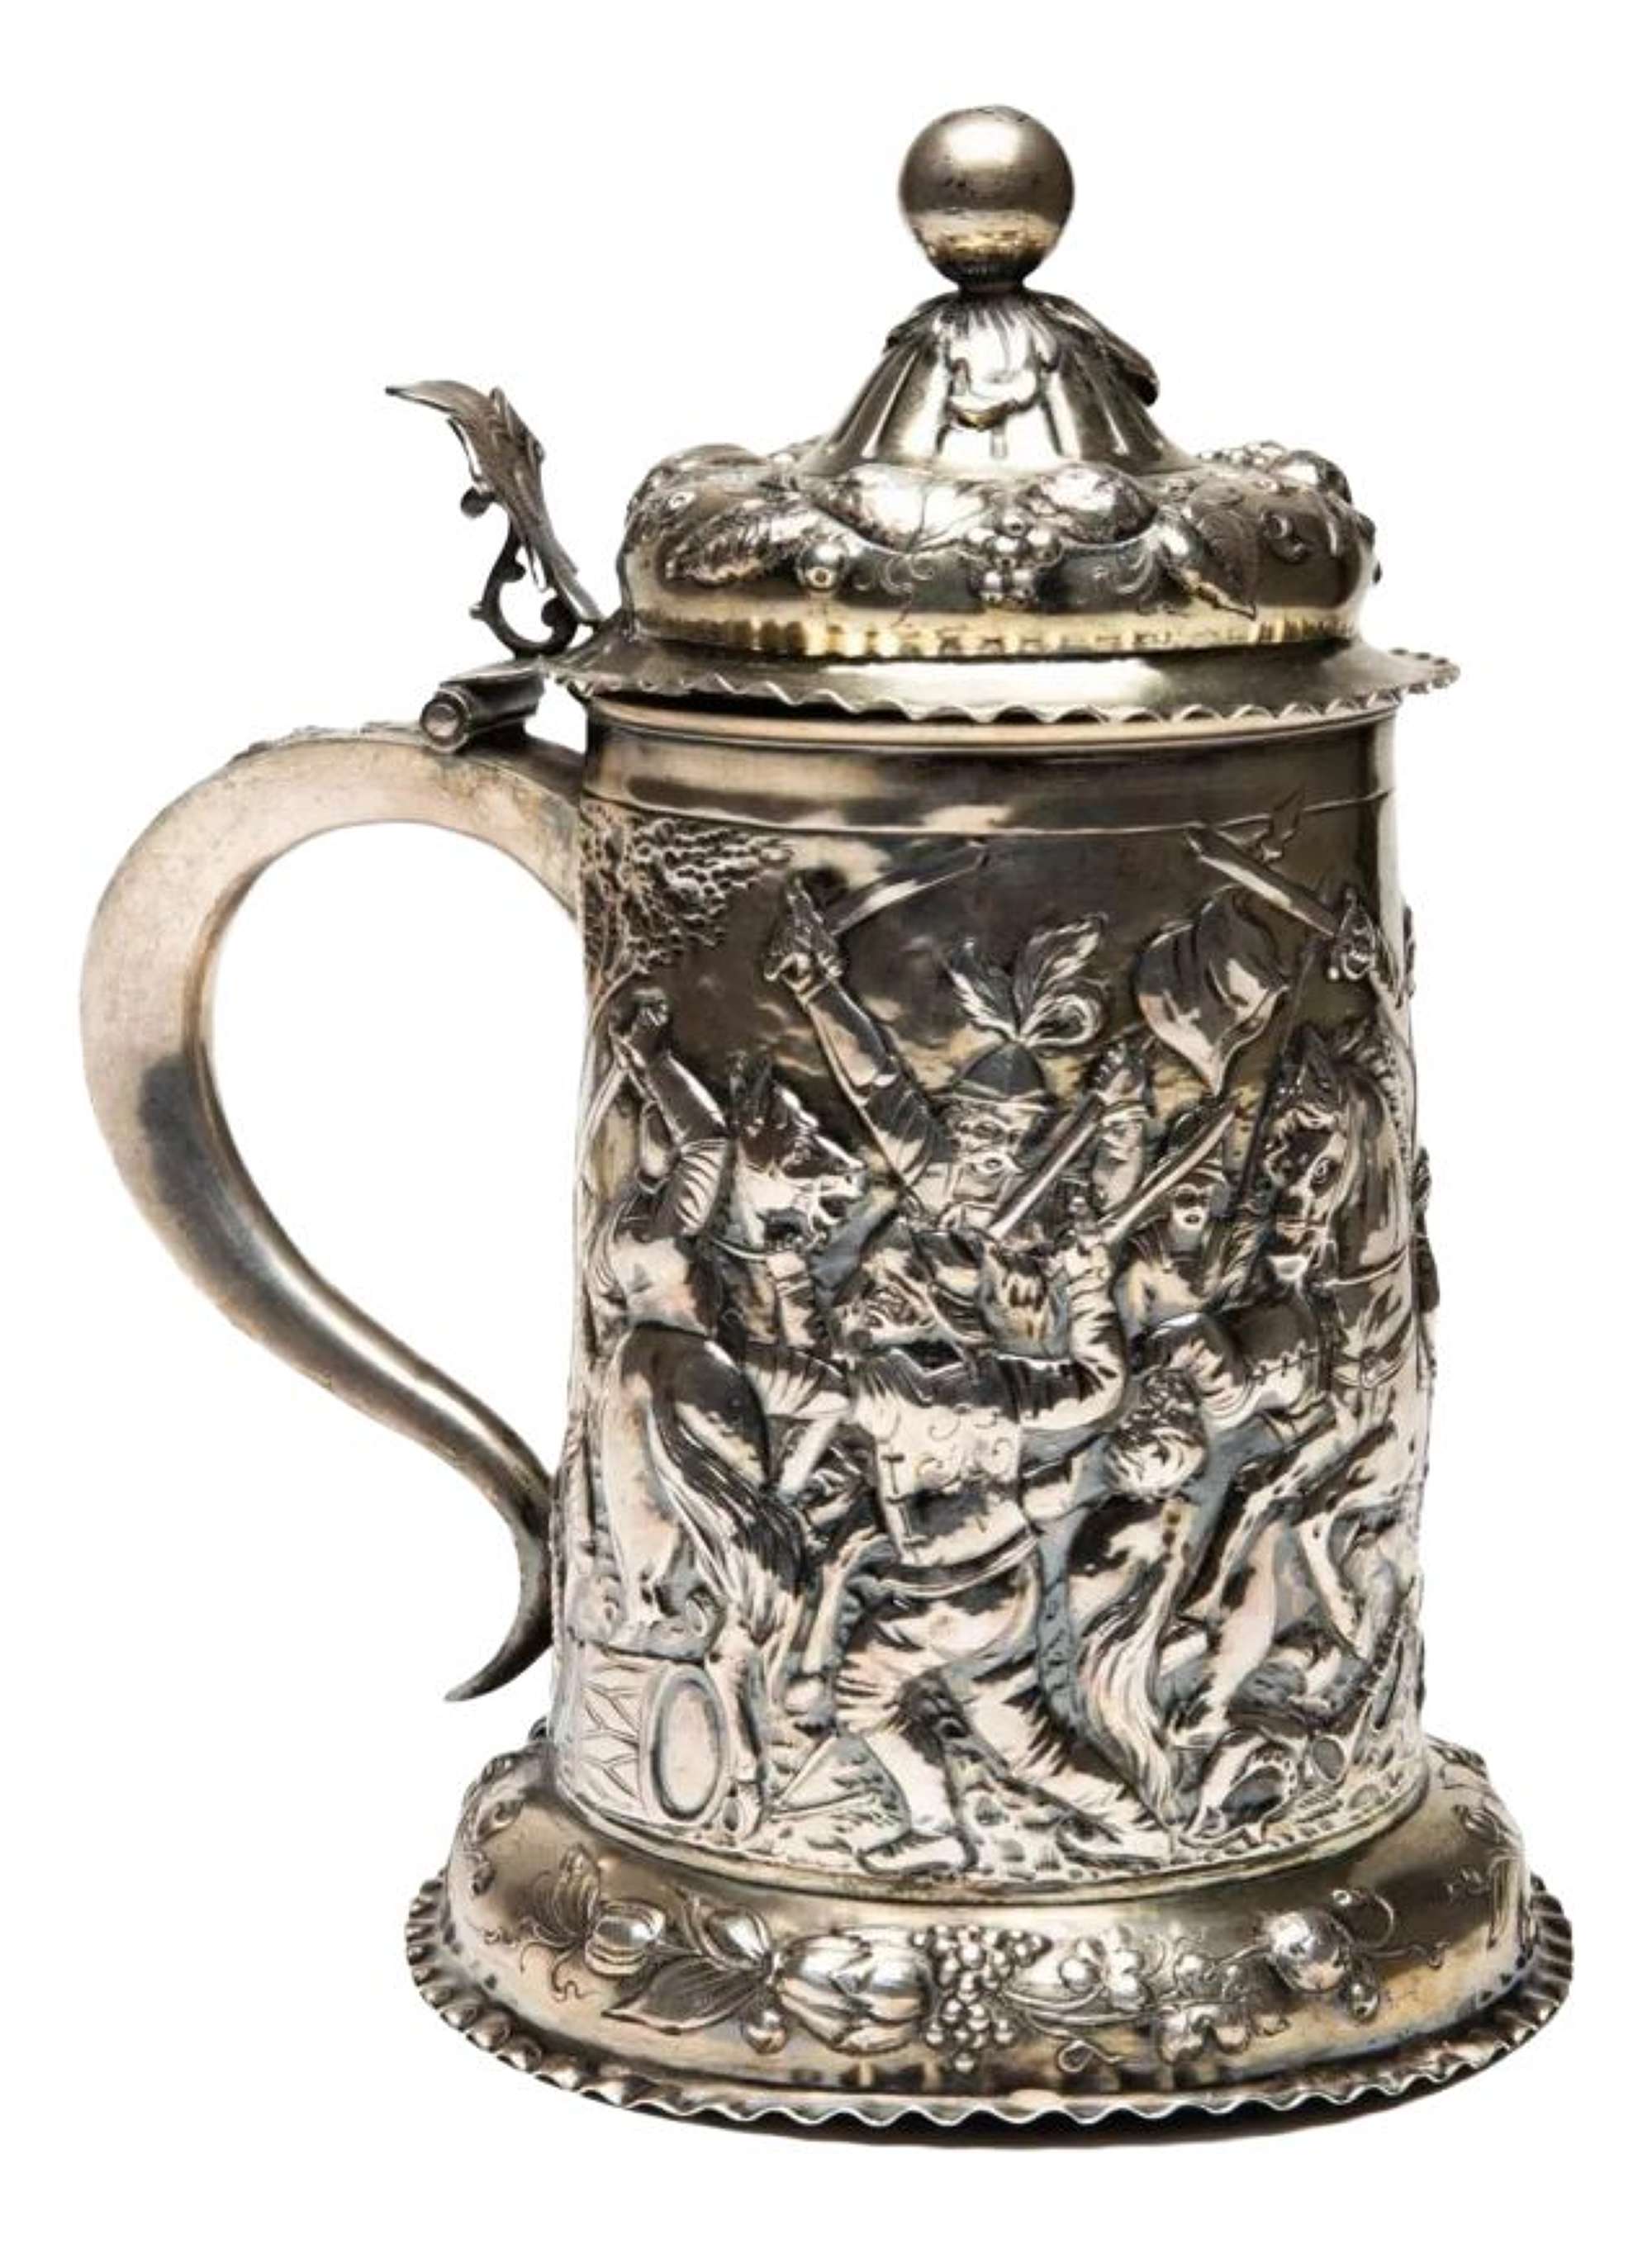 Silver Beer Mug with Battle Scenes, Early 19th Century